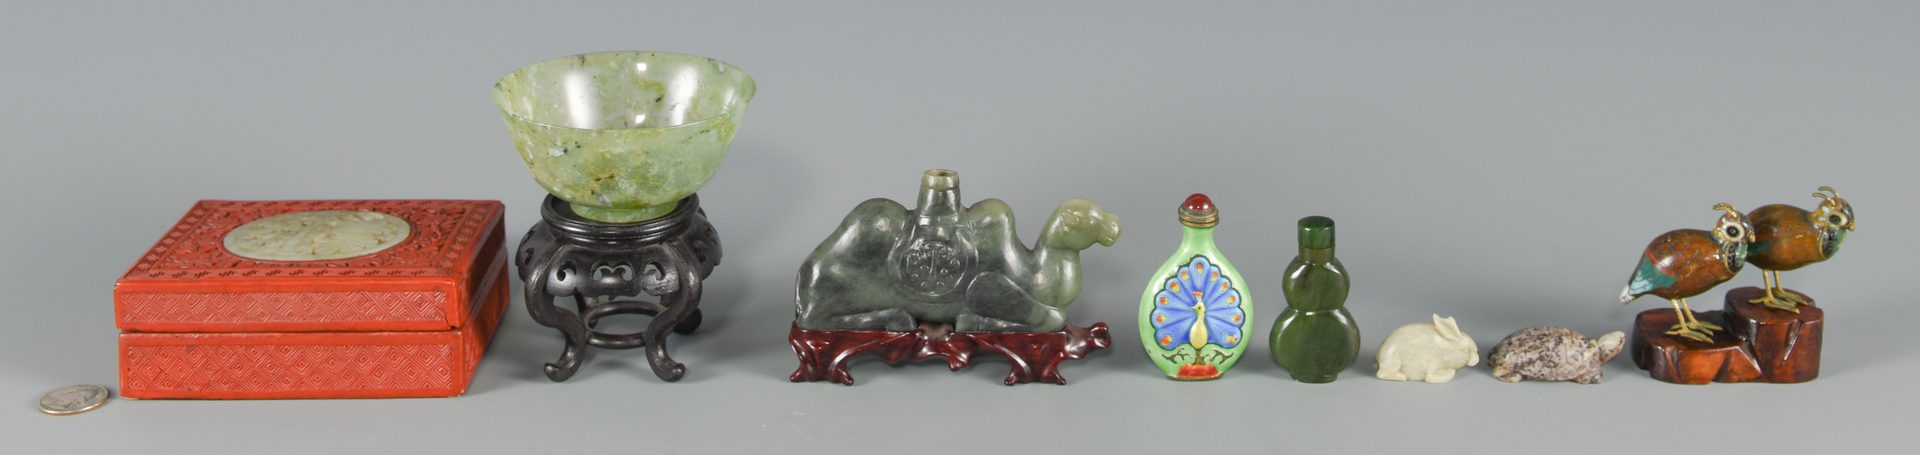 Lot 249: 9 Chinese Decorative Items